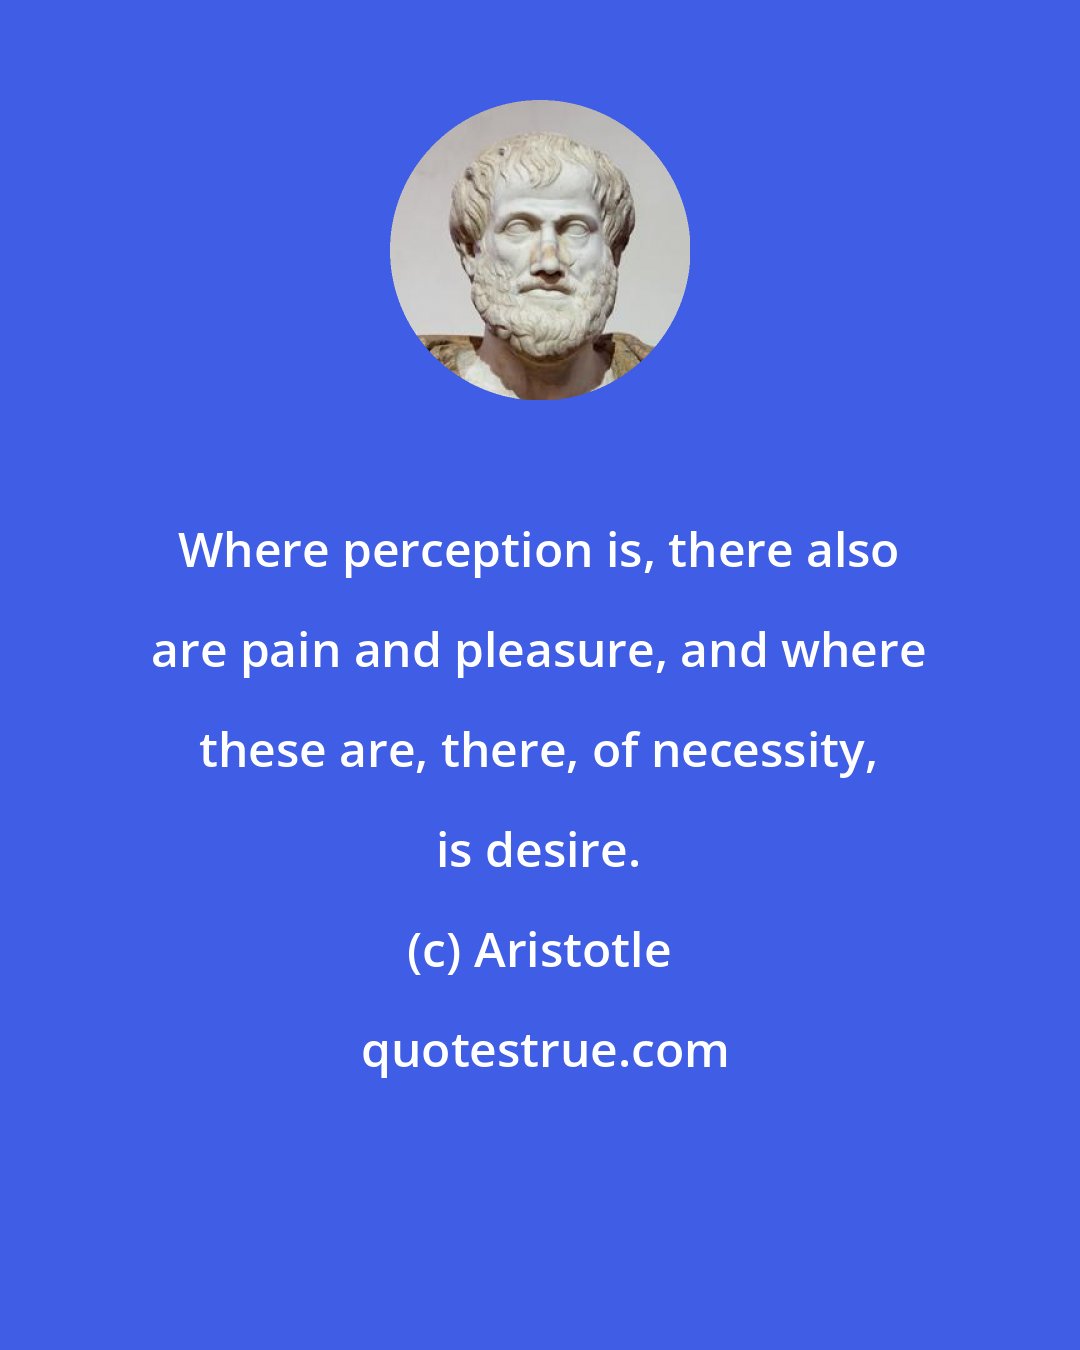 Aristotle: Where perception is, there also are pain and pleasure, and where these are, there, of necessity, is desire.